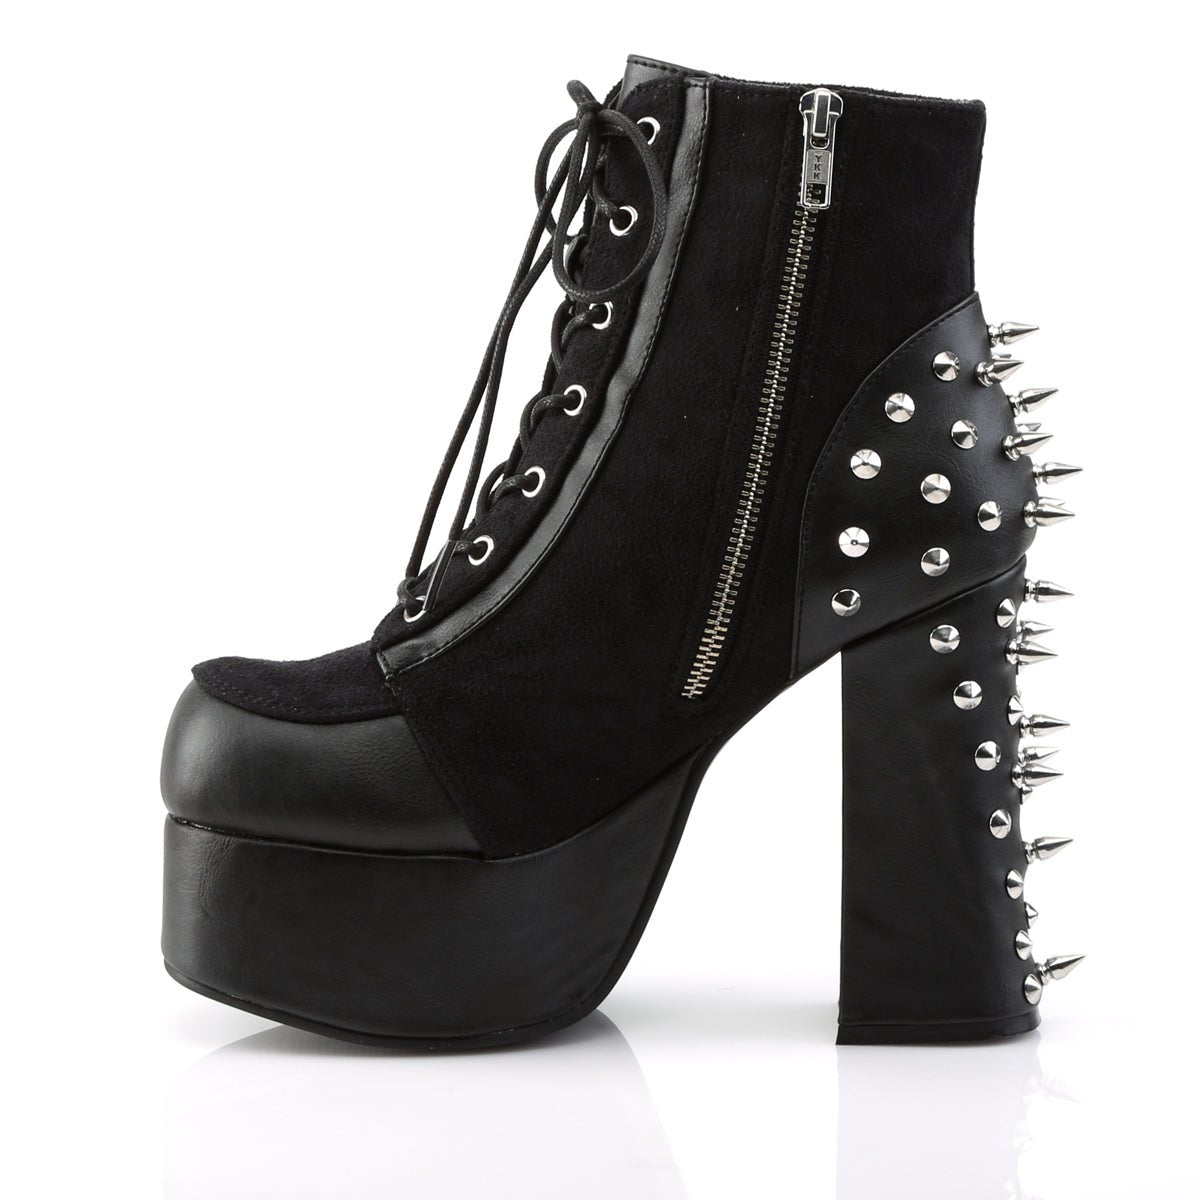 Too Fast | Demonia Charade 100 | Black Vegan Leather & Suede Women's Ankle Boots